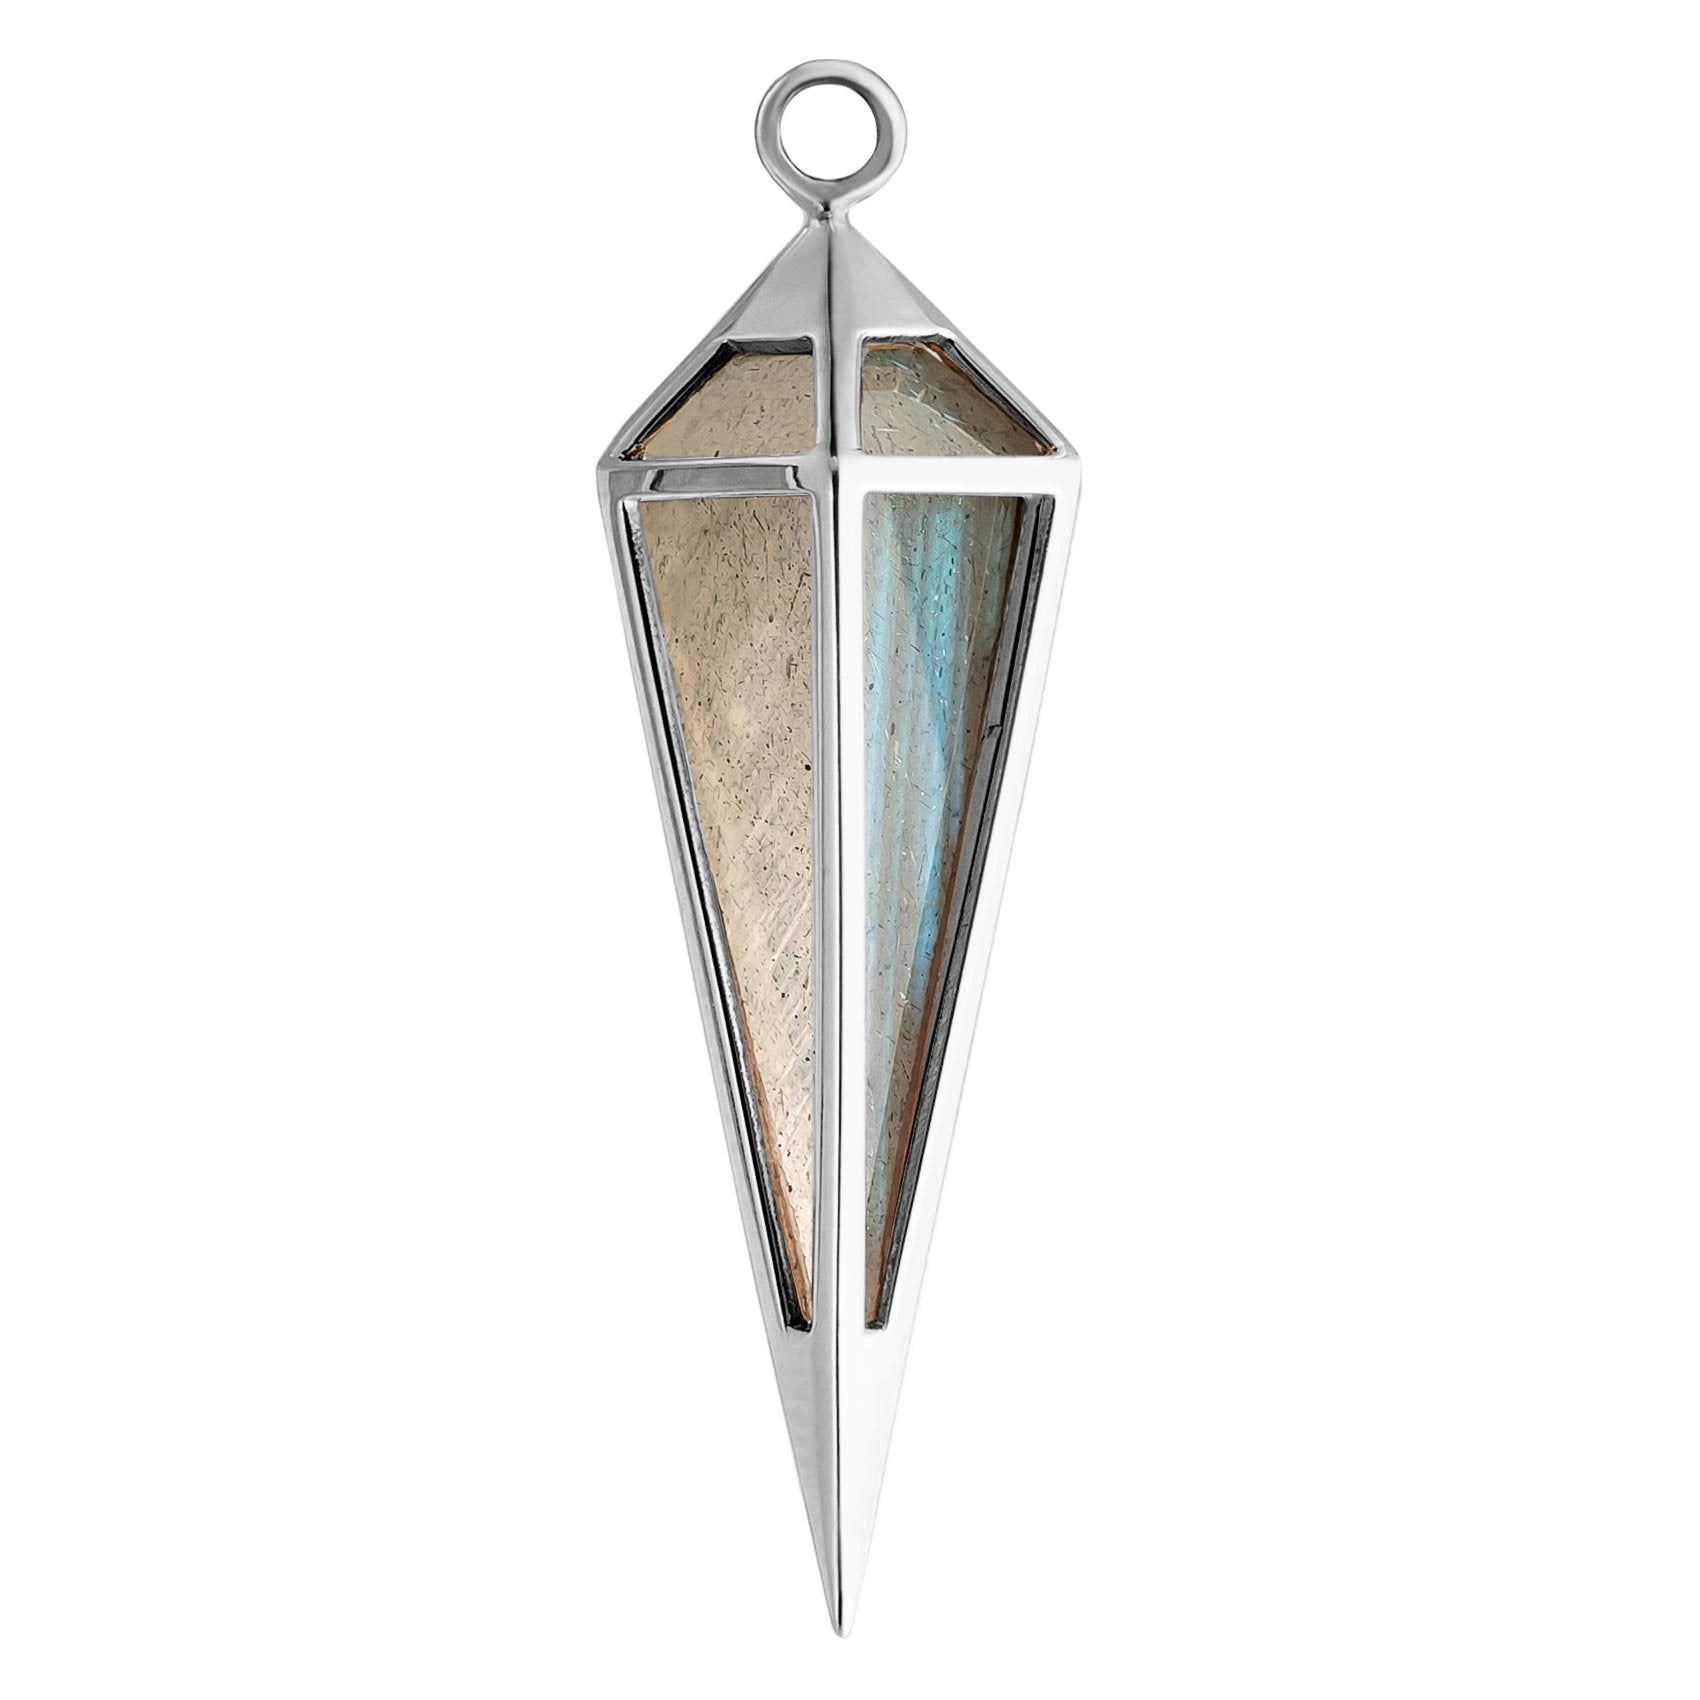 Metier by tomfoolery 9ct White Gold Long Point Pendulum Plaque with Labradorite